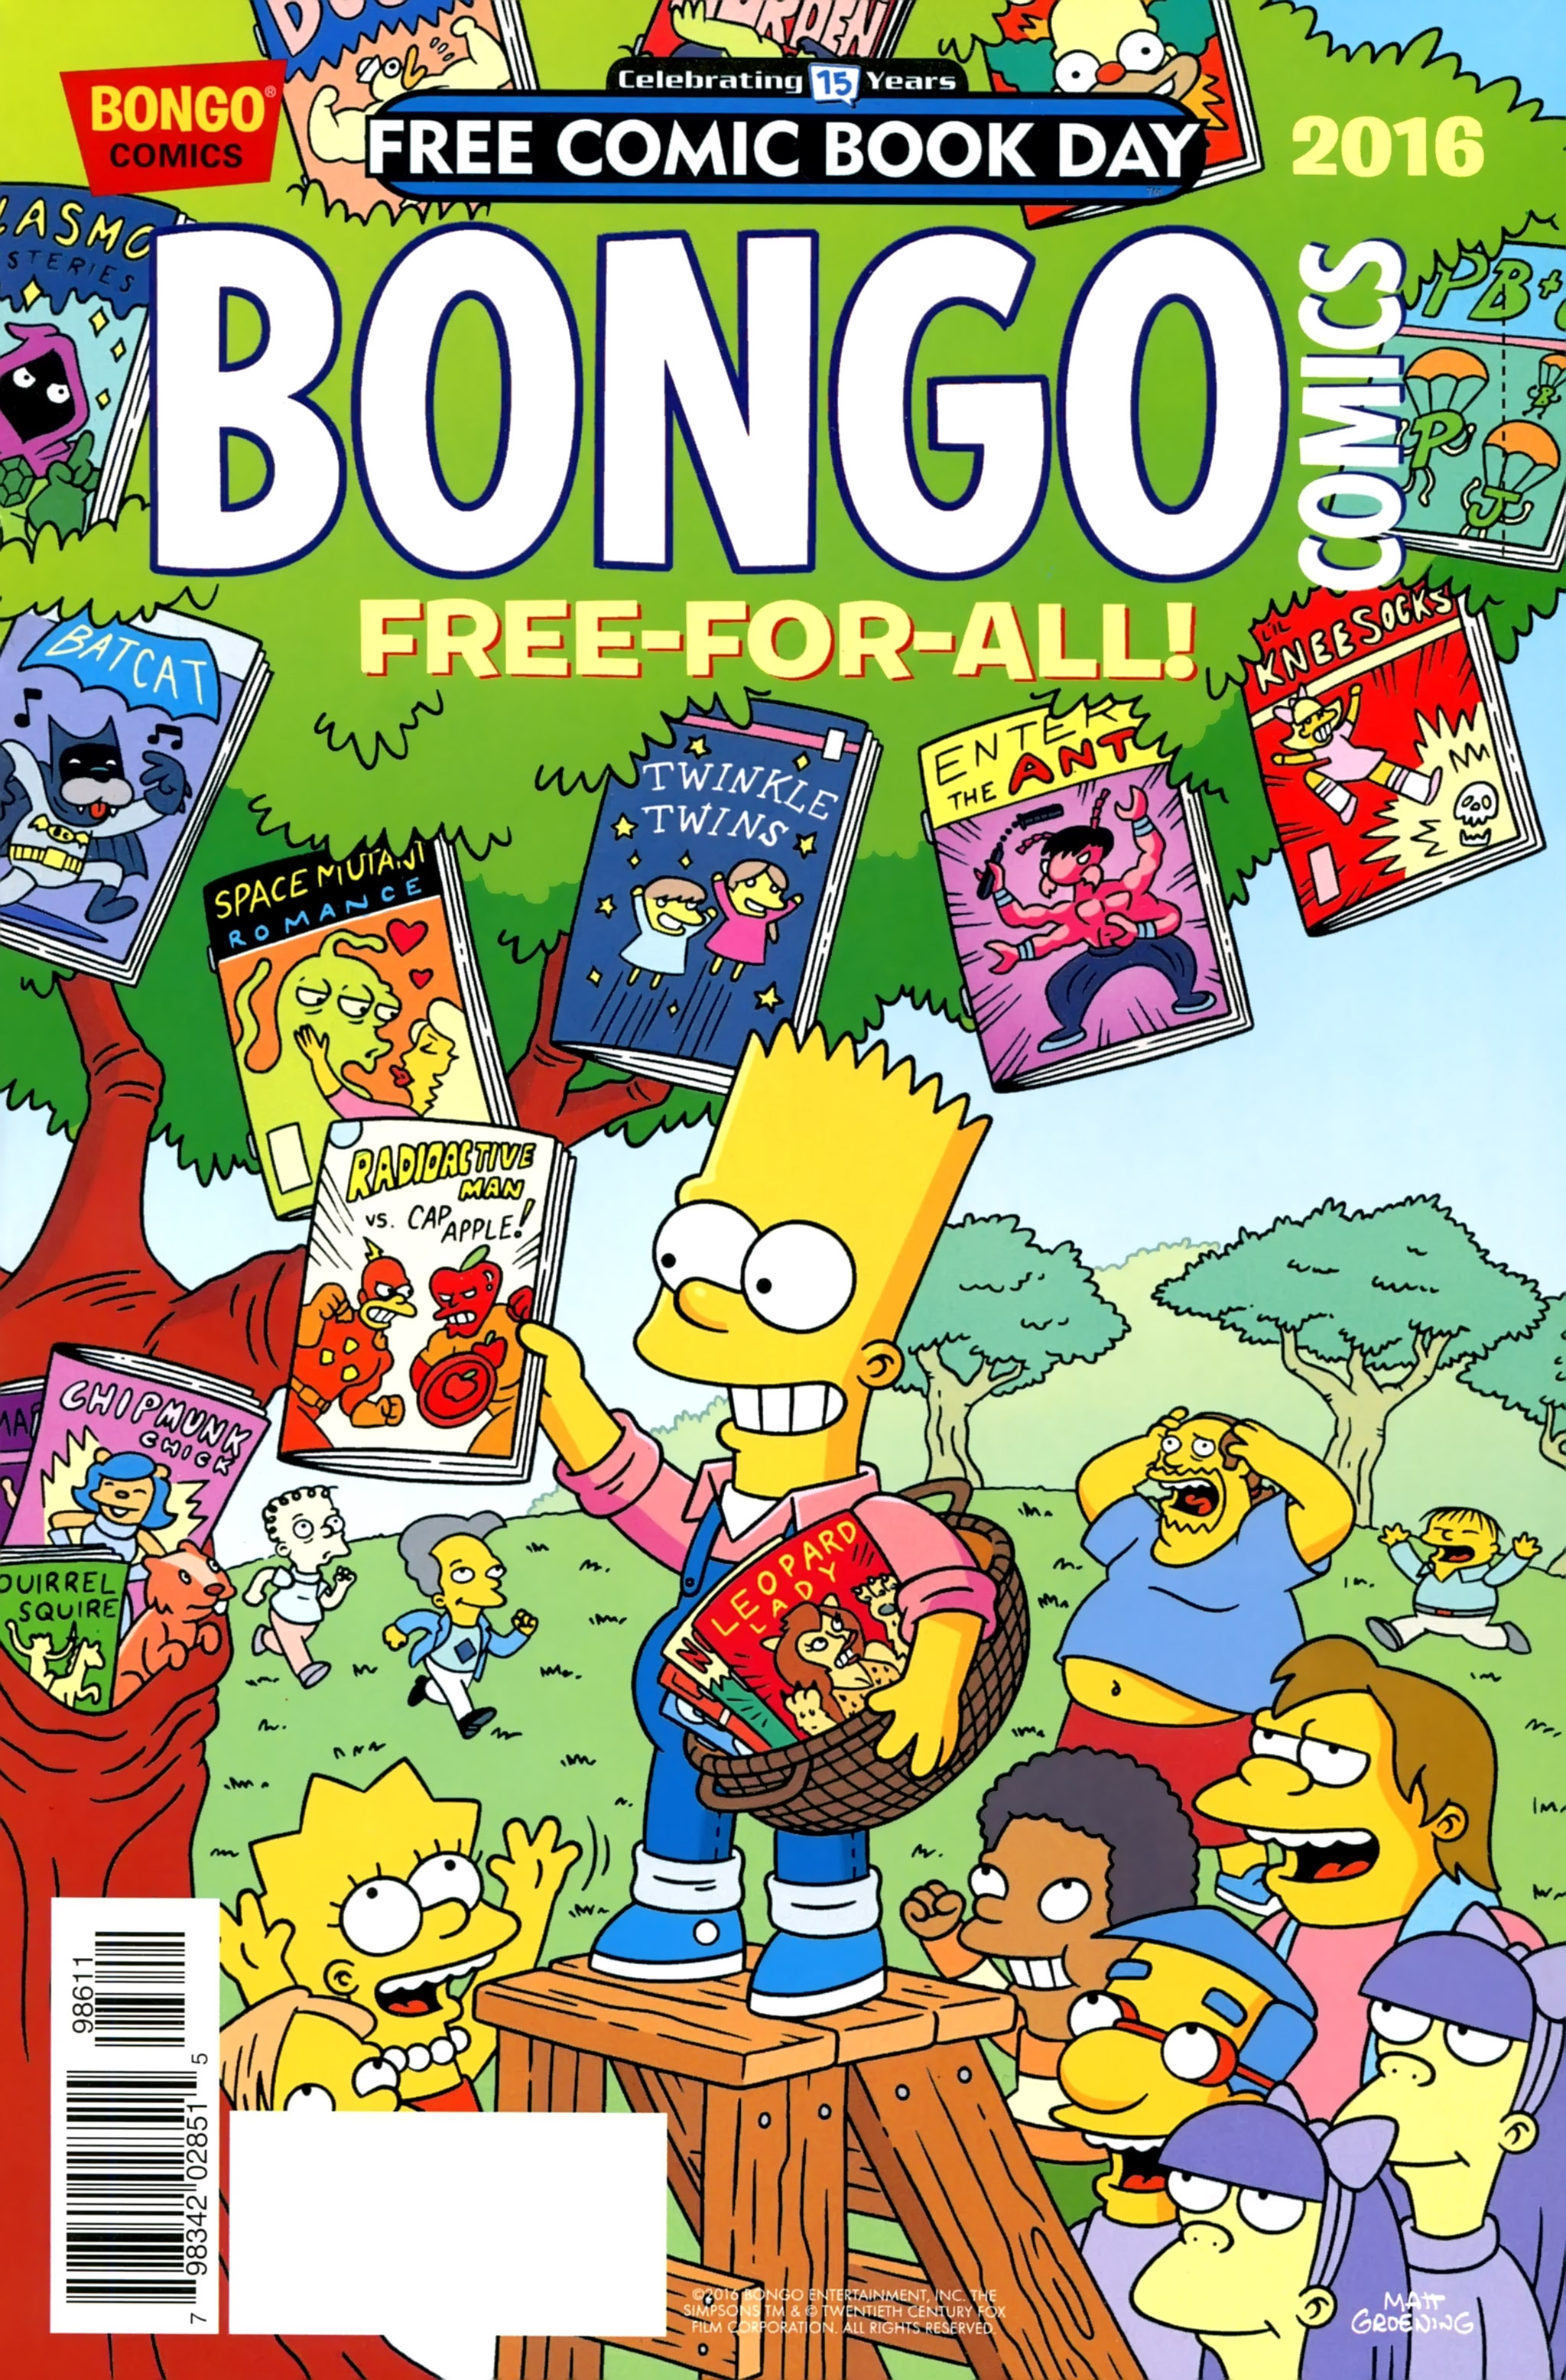 Read online Free Comic Book Day 2016 comic -  Issue # Bongo Comics Free-For-All! - 1